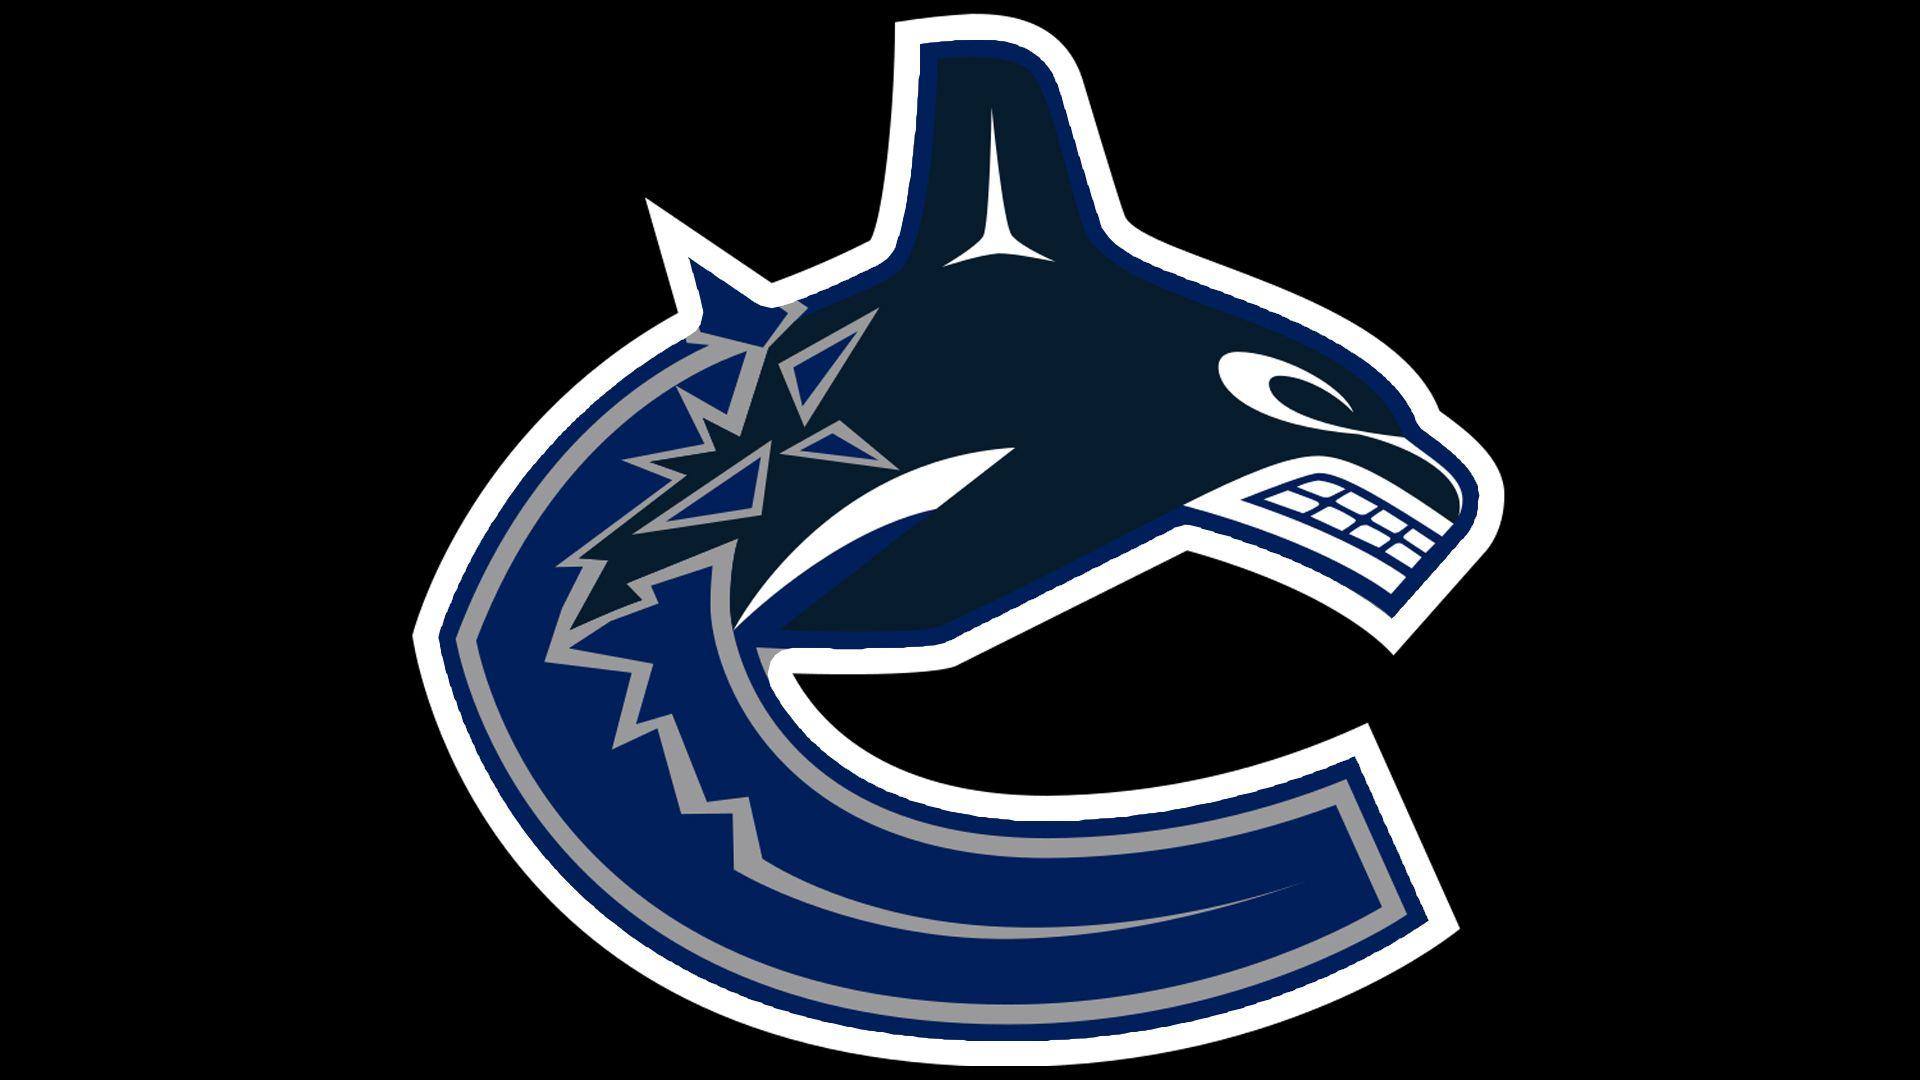 Vancouver Canucks Logo - Vancouver Canucks Logo, Vancouver Canucks Symbol, Meaning, History ...